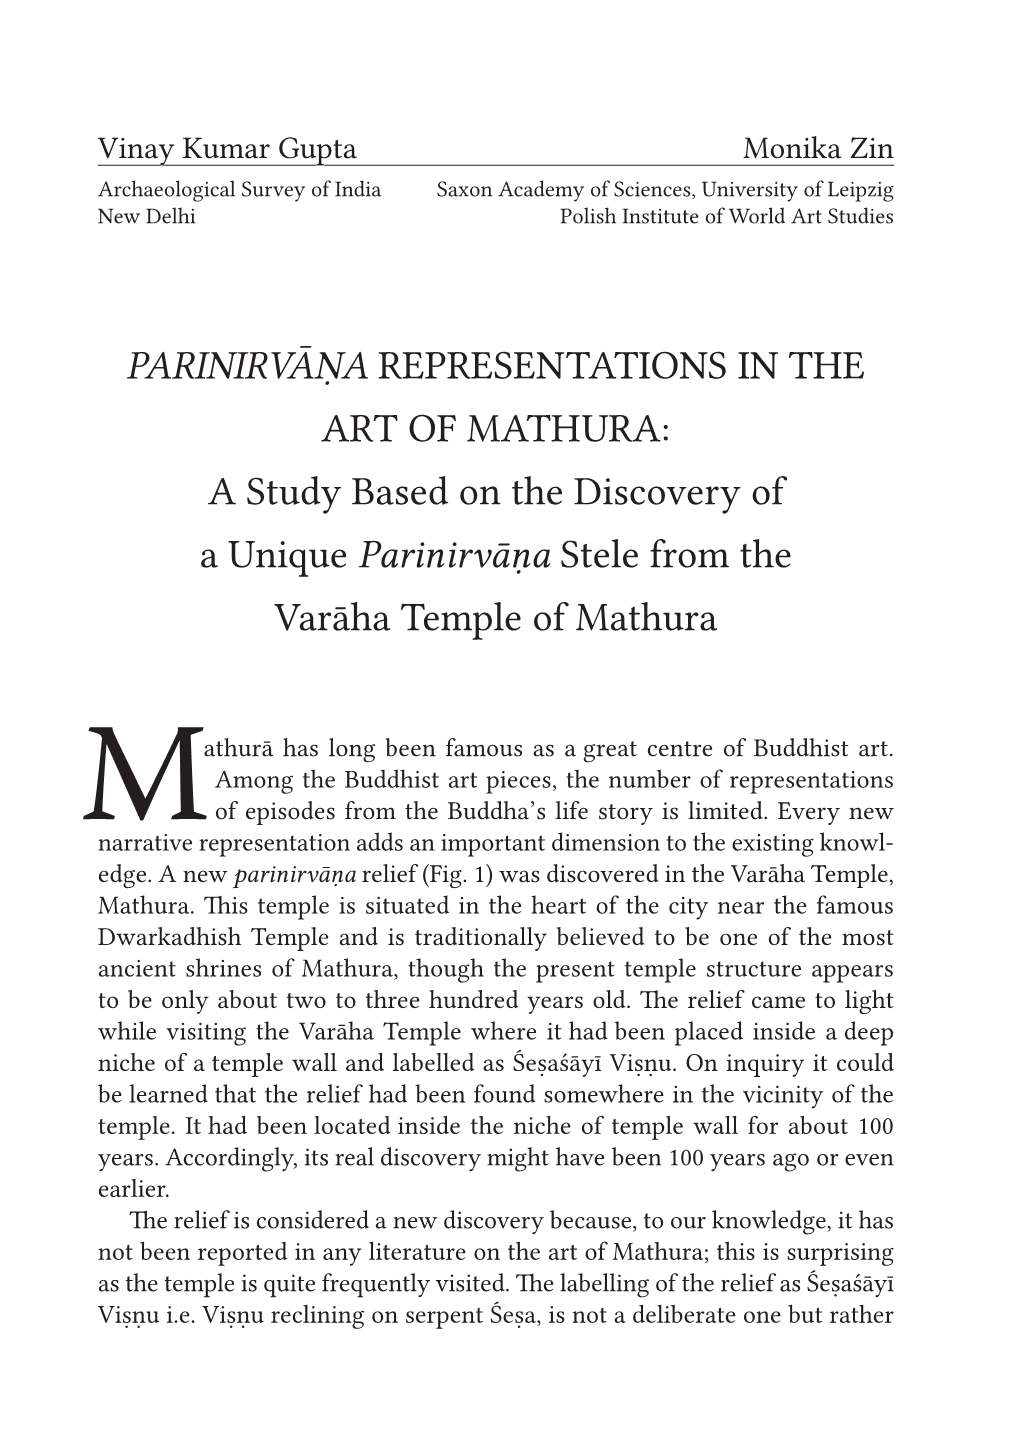 PARINIRVĀṆA REPRESENTATIONS in the ART of MATHURA : a Study Based on the Discovery of a Unique Parinirvāṇa Stele from the Varāha Temple of Mathura